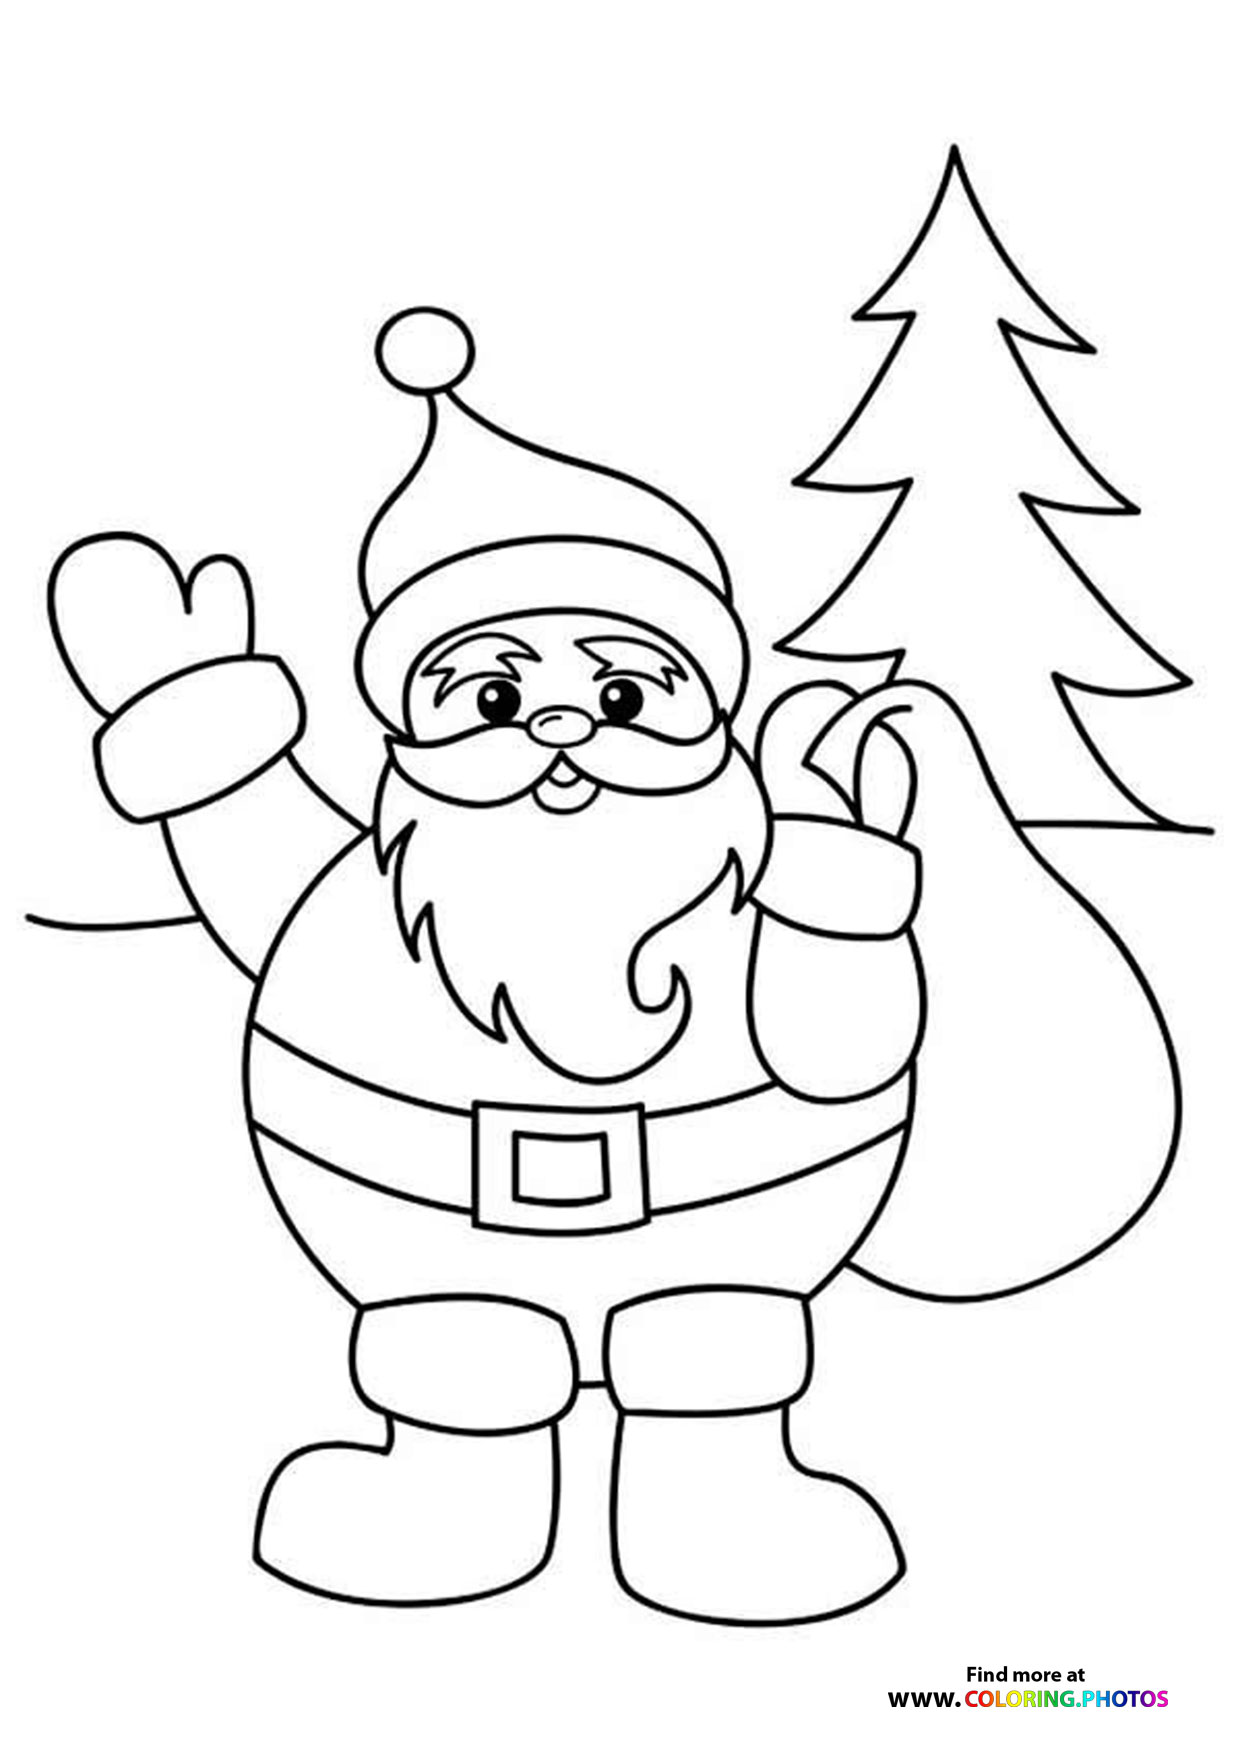 Santa Claus waving - Coloring Pages for kids